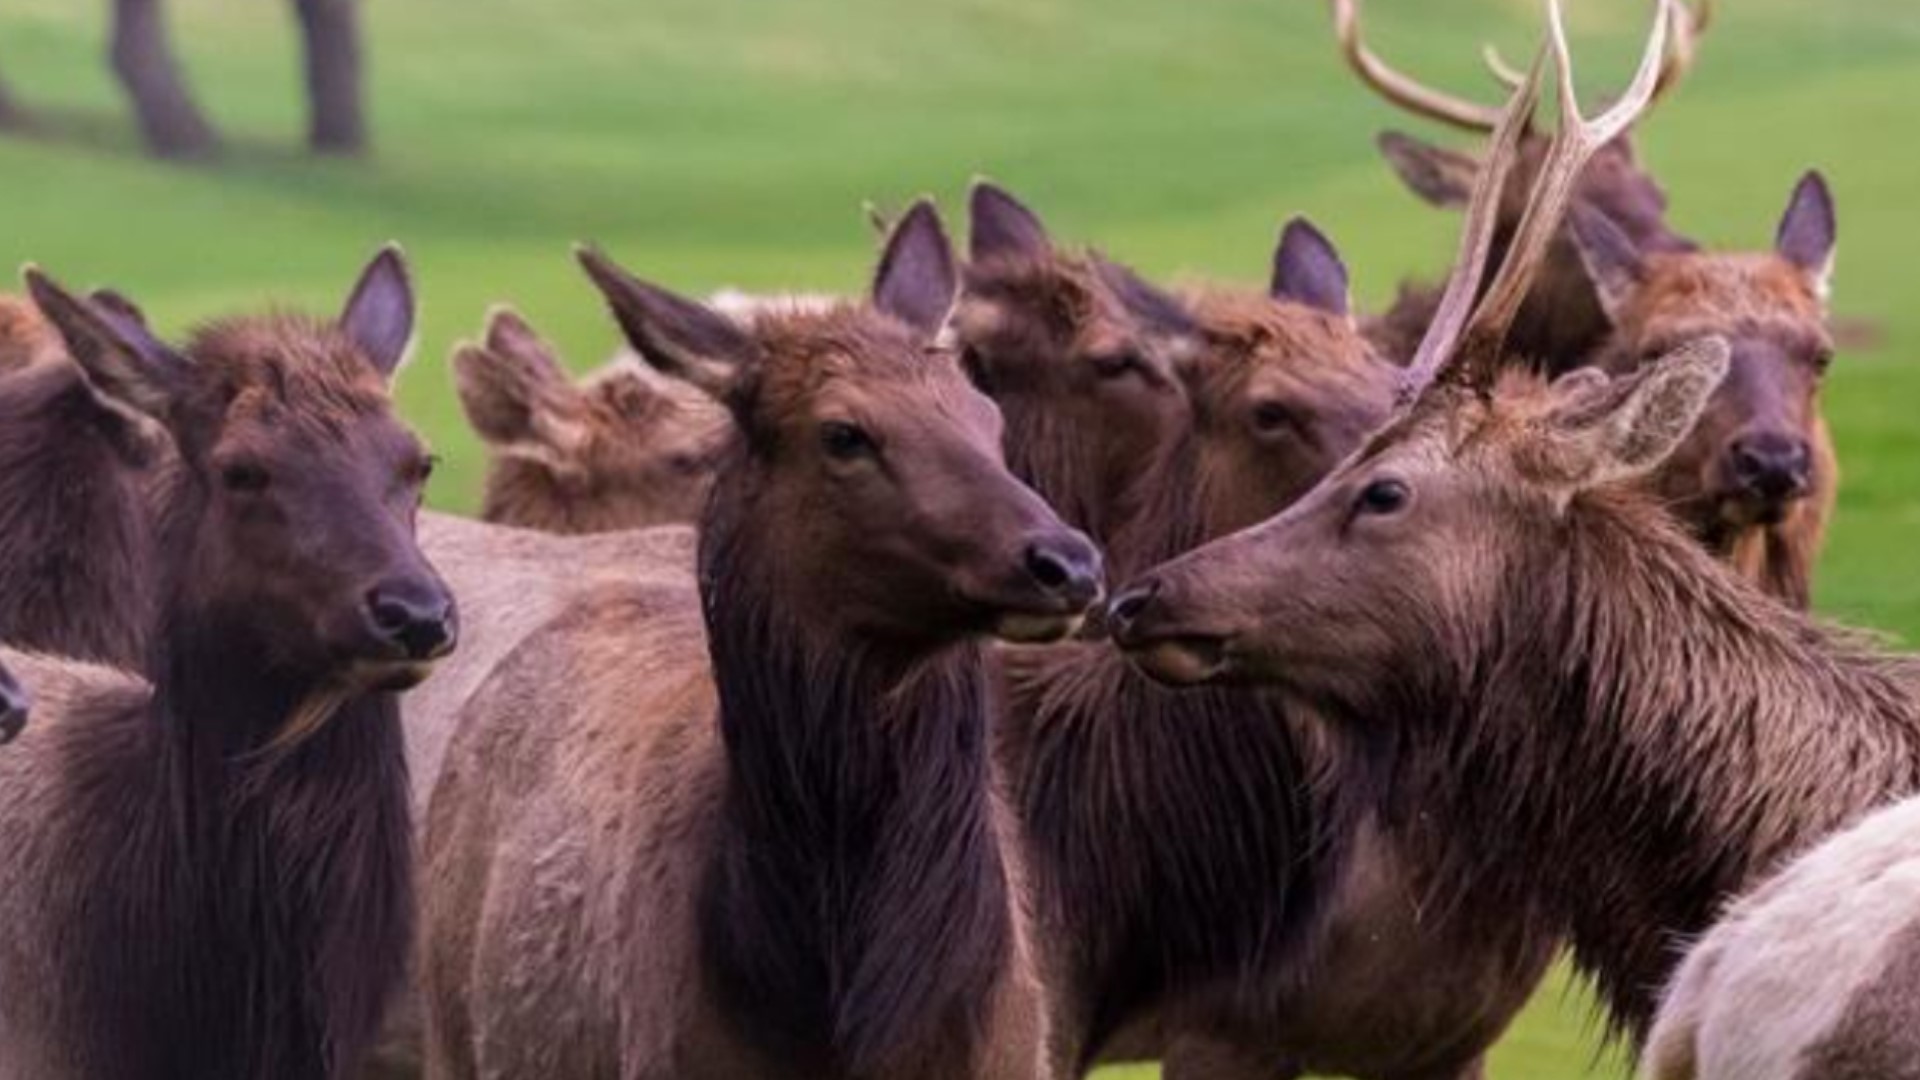 Oregon Department of Fish and Wildlife granted hunting tags over a three-year period to an Oregon coast resident after a herd of elk kept destroying his property.